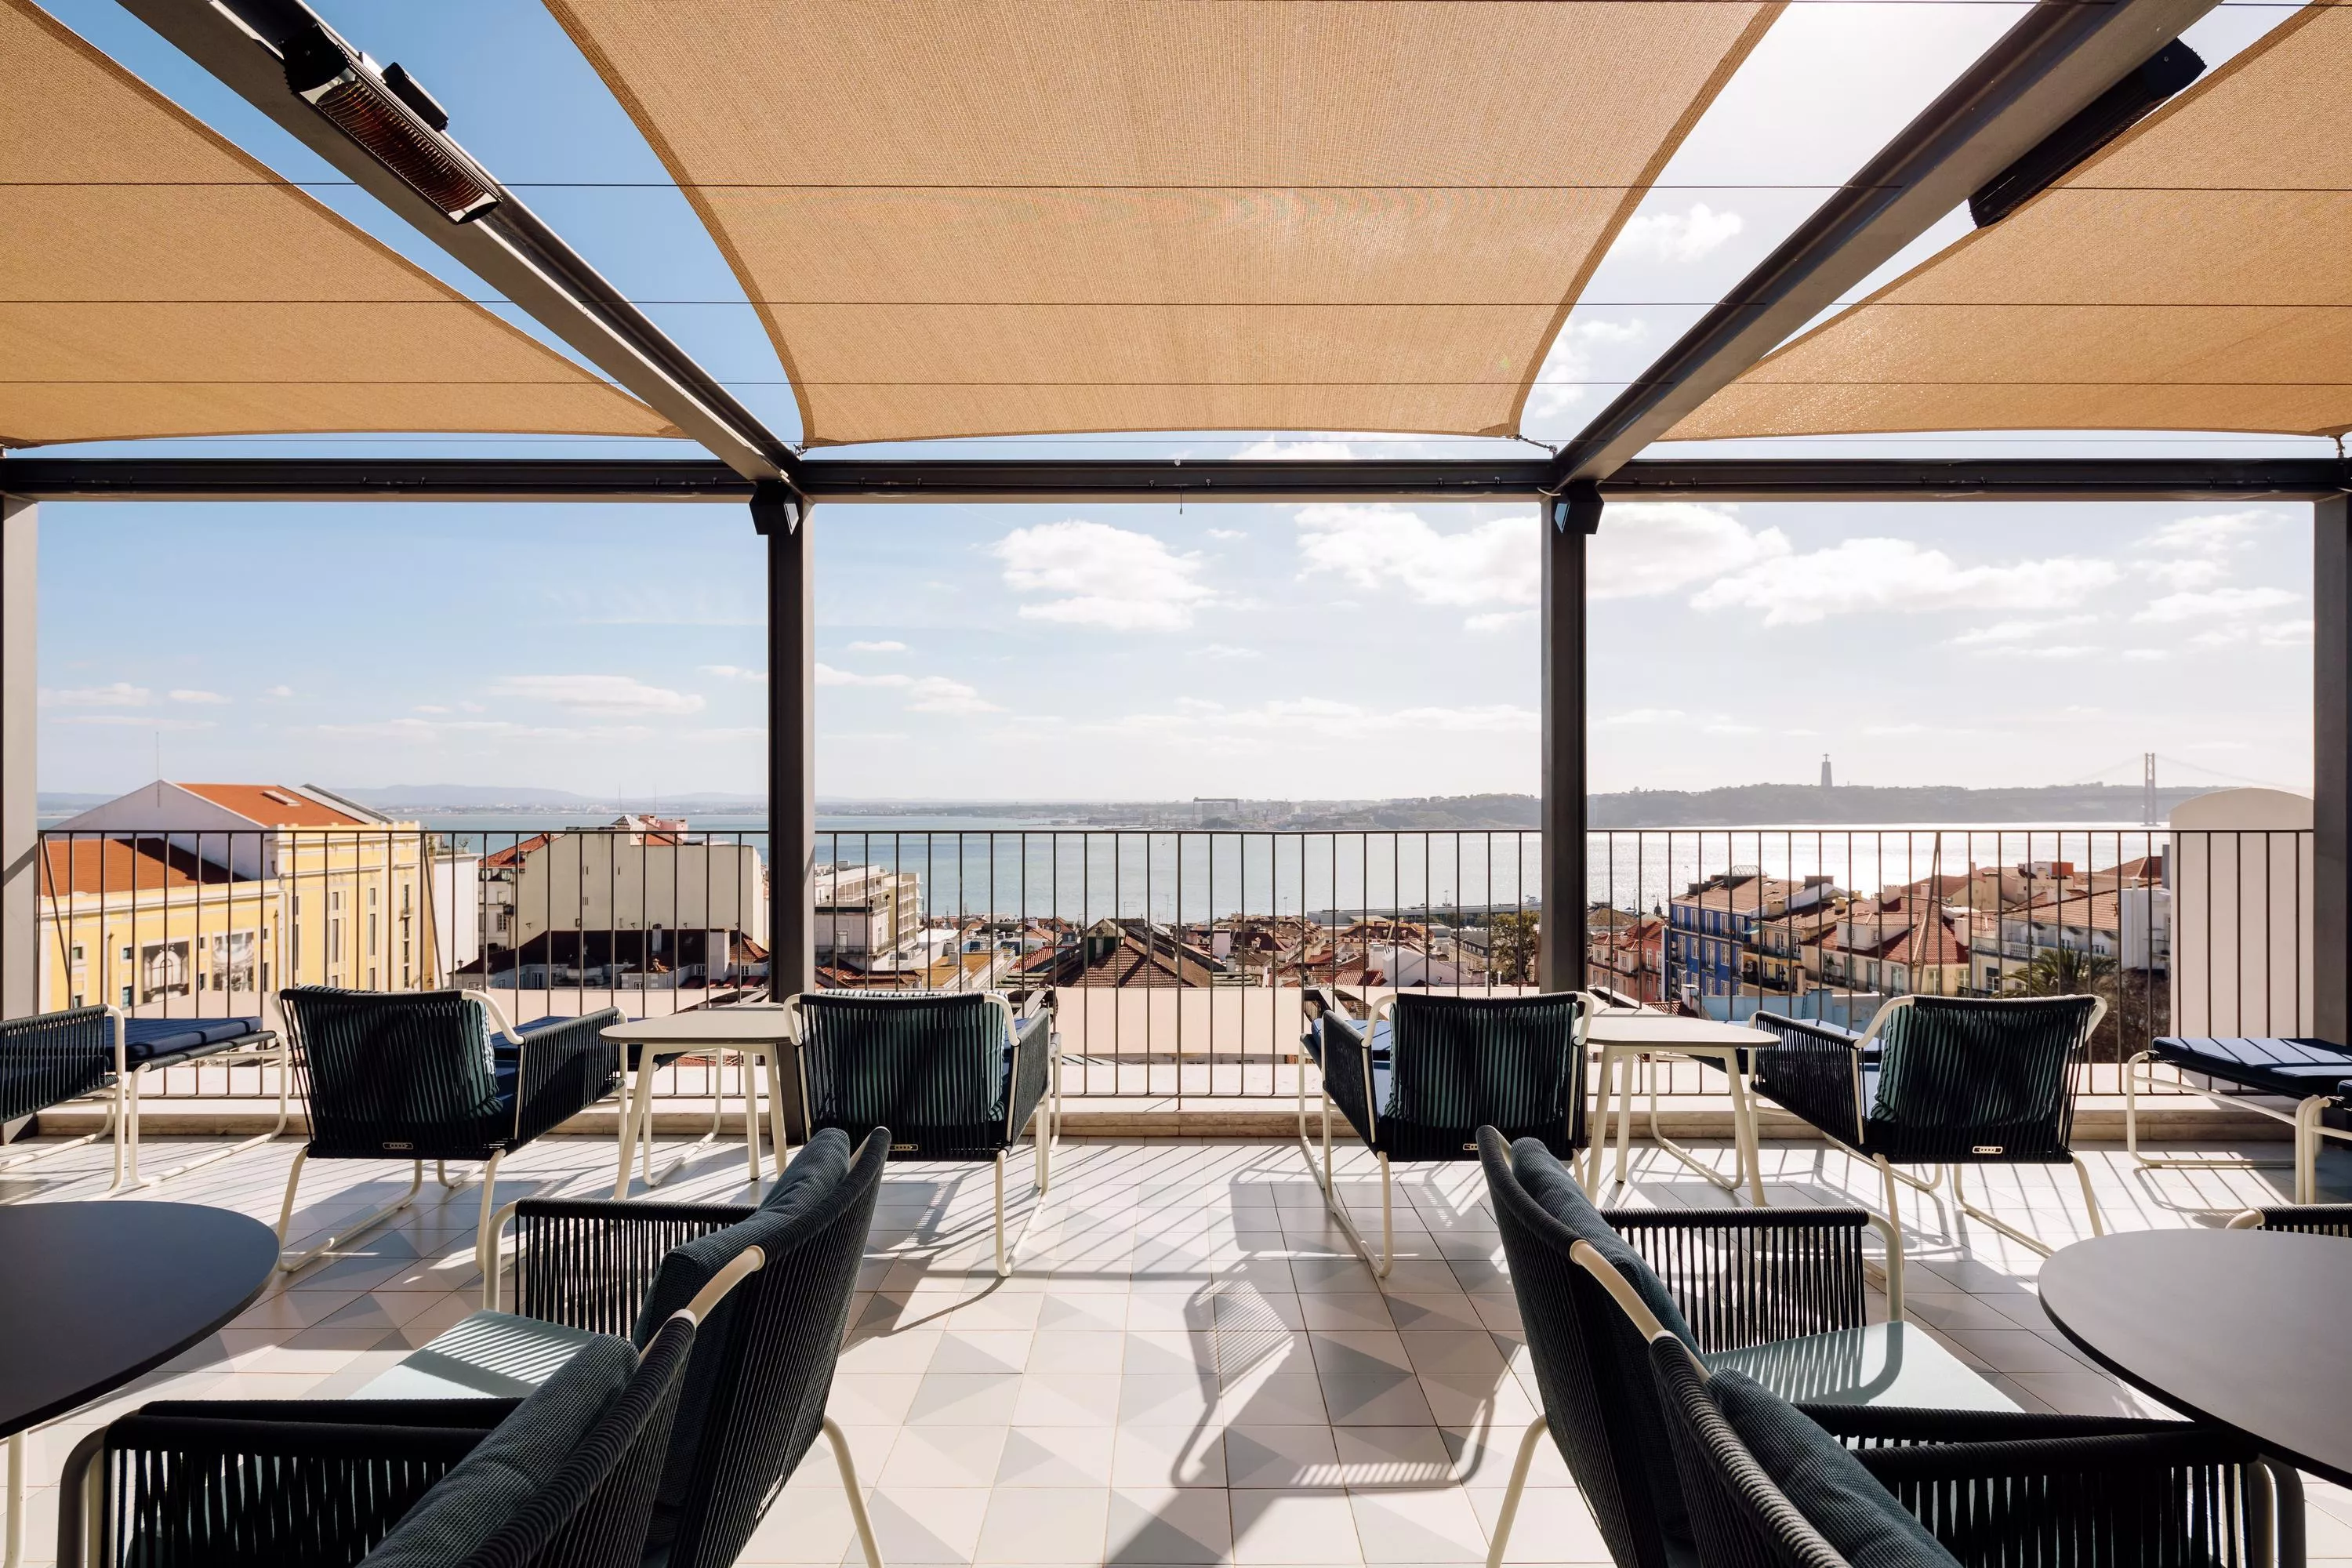 The Bairro Alto Hotel Terrace in Portugal, Europe | Observation Decks,Bars - Rated 3.8